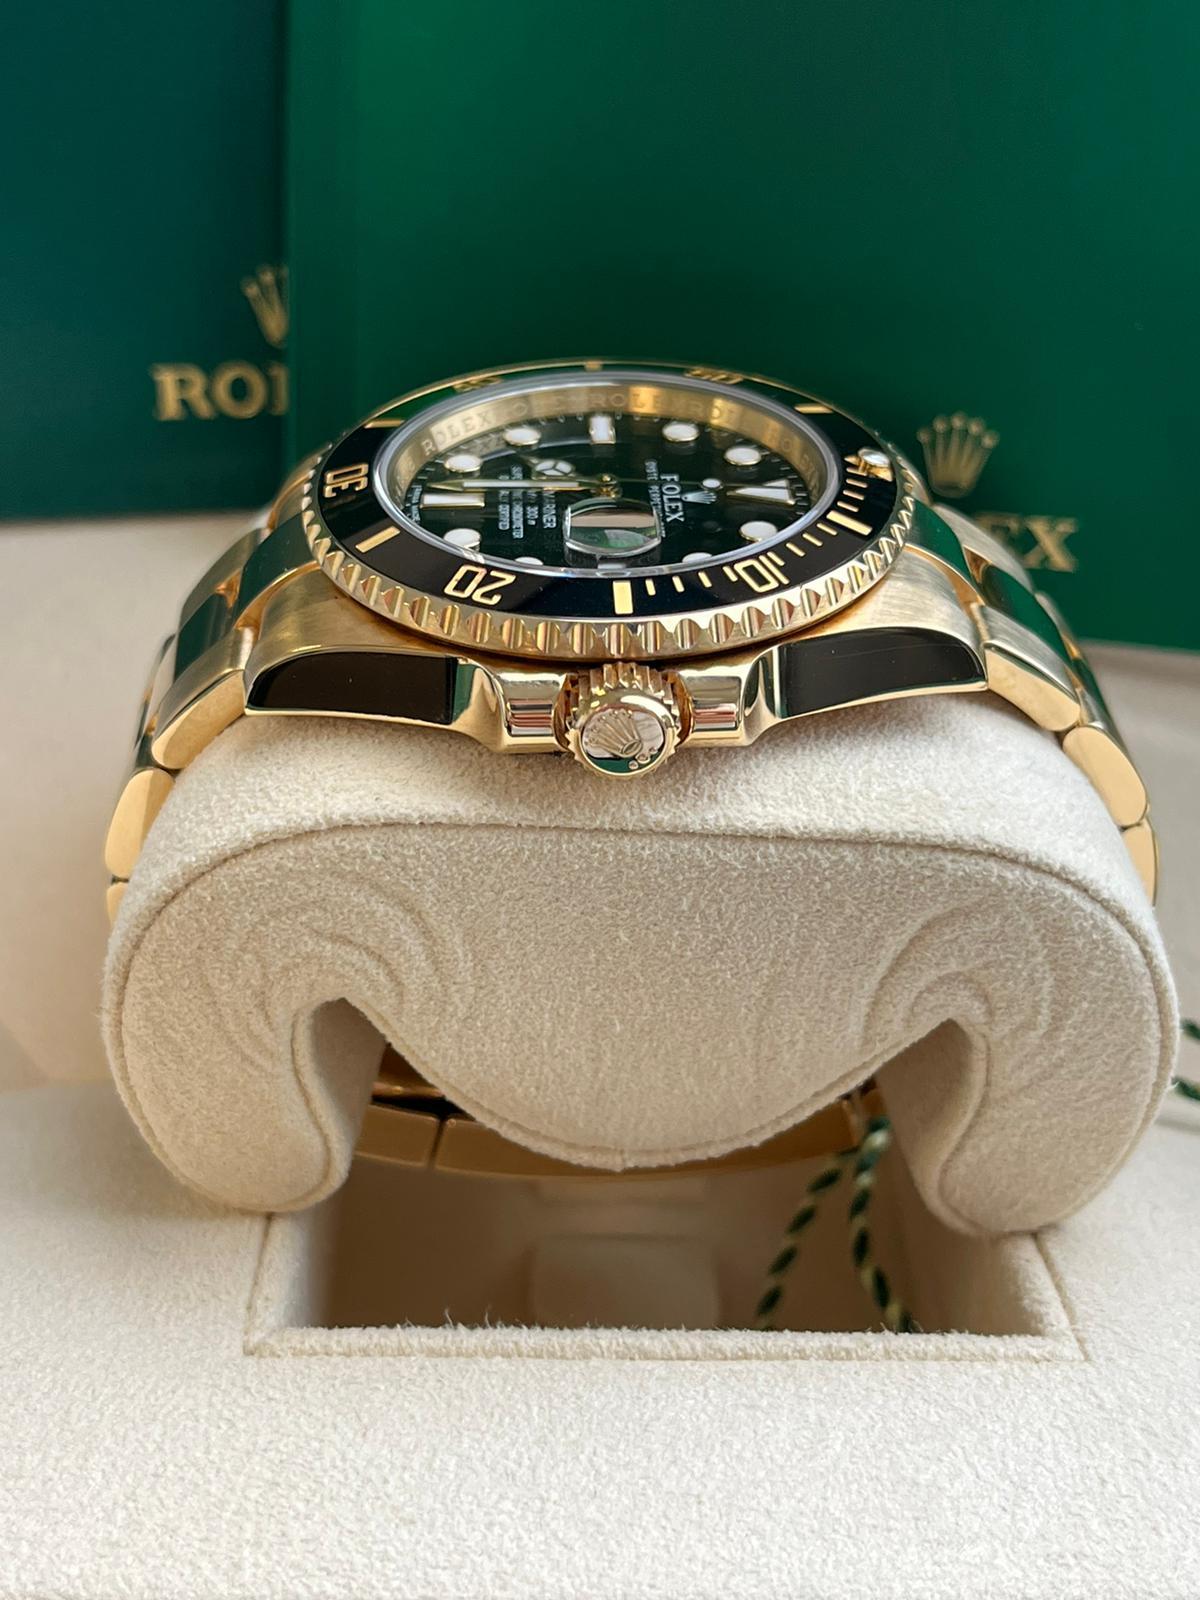 Rolex Submariner Date Automatic Yellow Gold Black Dial Men's Watch 116618LN For Sale 7